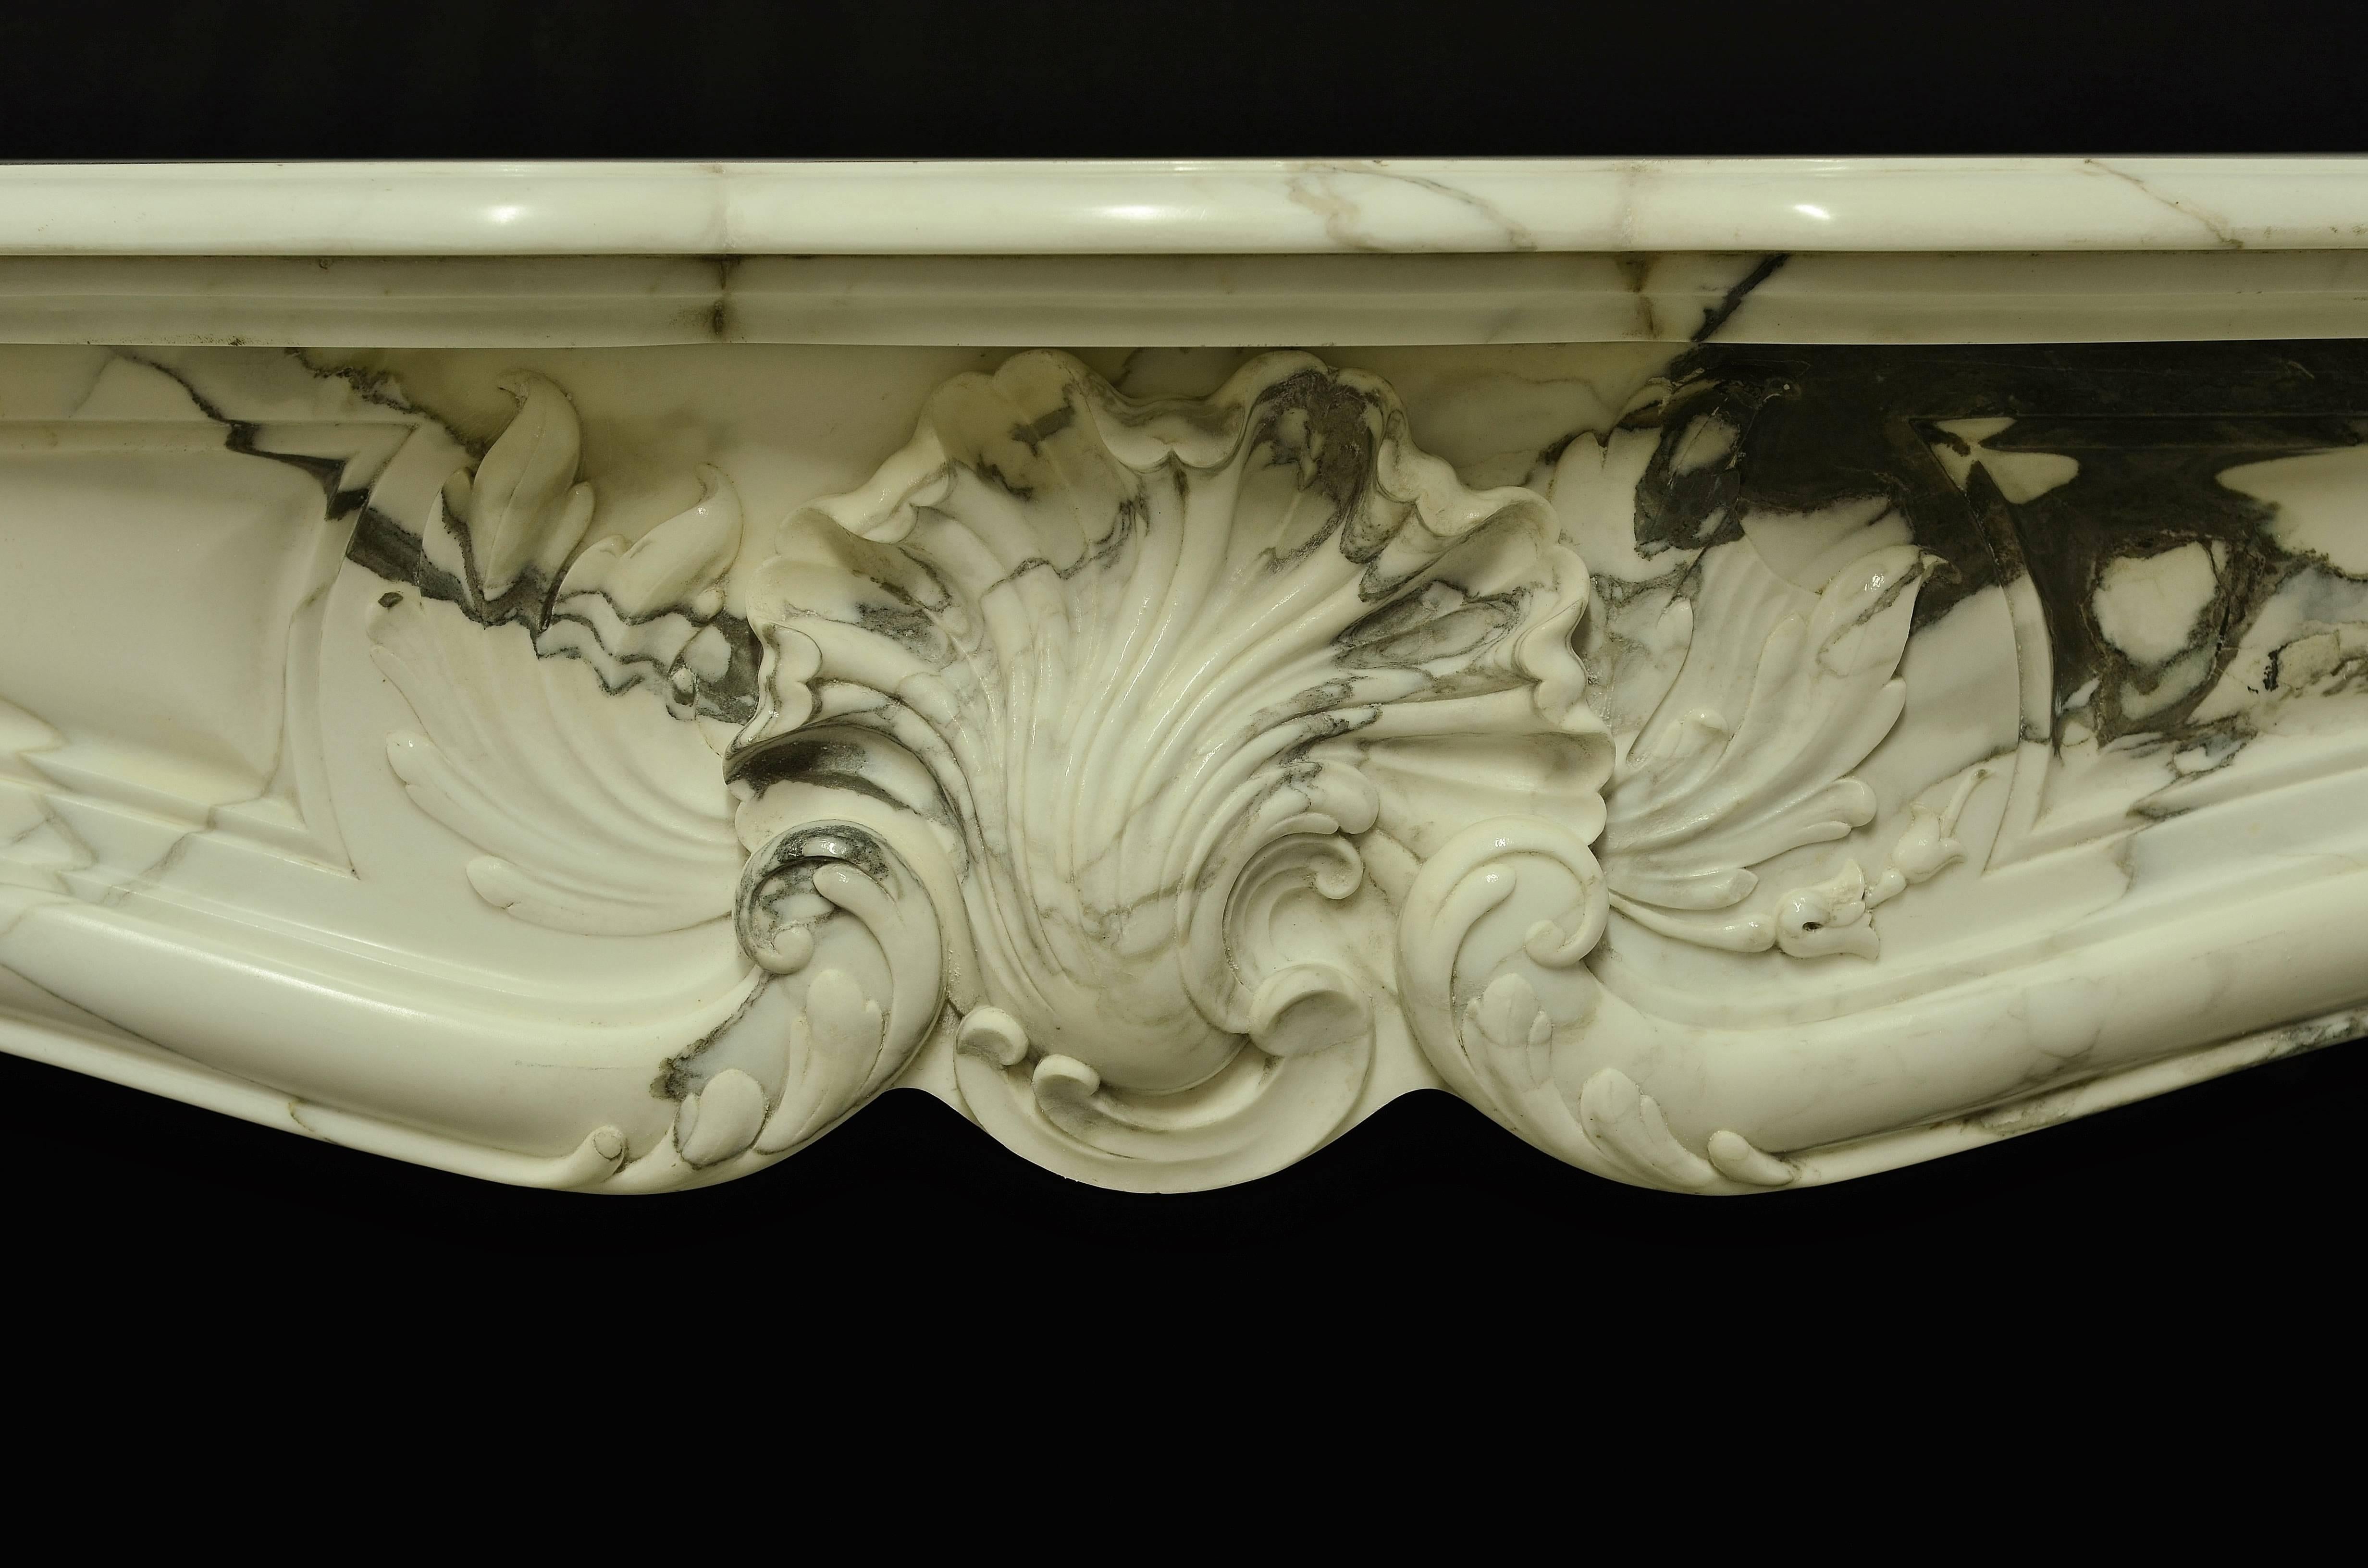 A beautiful antique French Louis XV fireplace, executed in very nice warm marble with strong and dark veins,

19th century.

Excellent condition, minor restoration. Ask for details, ready to be shipped.

Opening measurements: 39.7 x 38.1 inch.